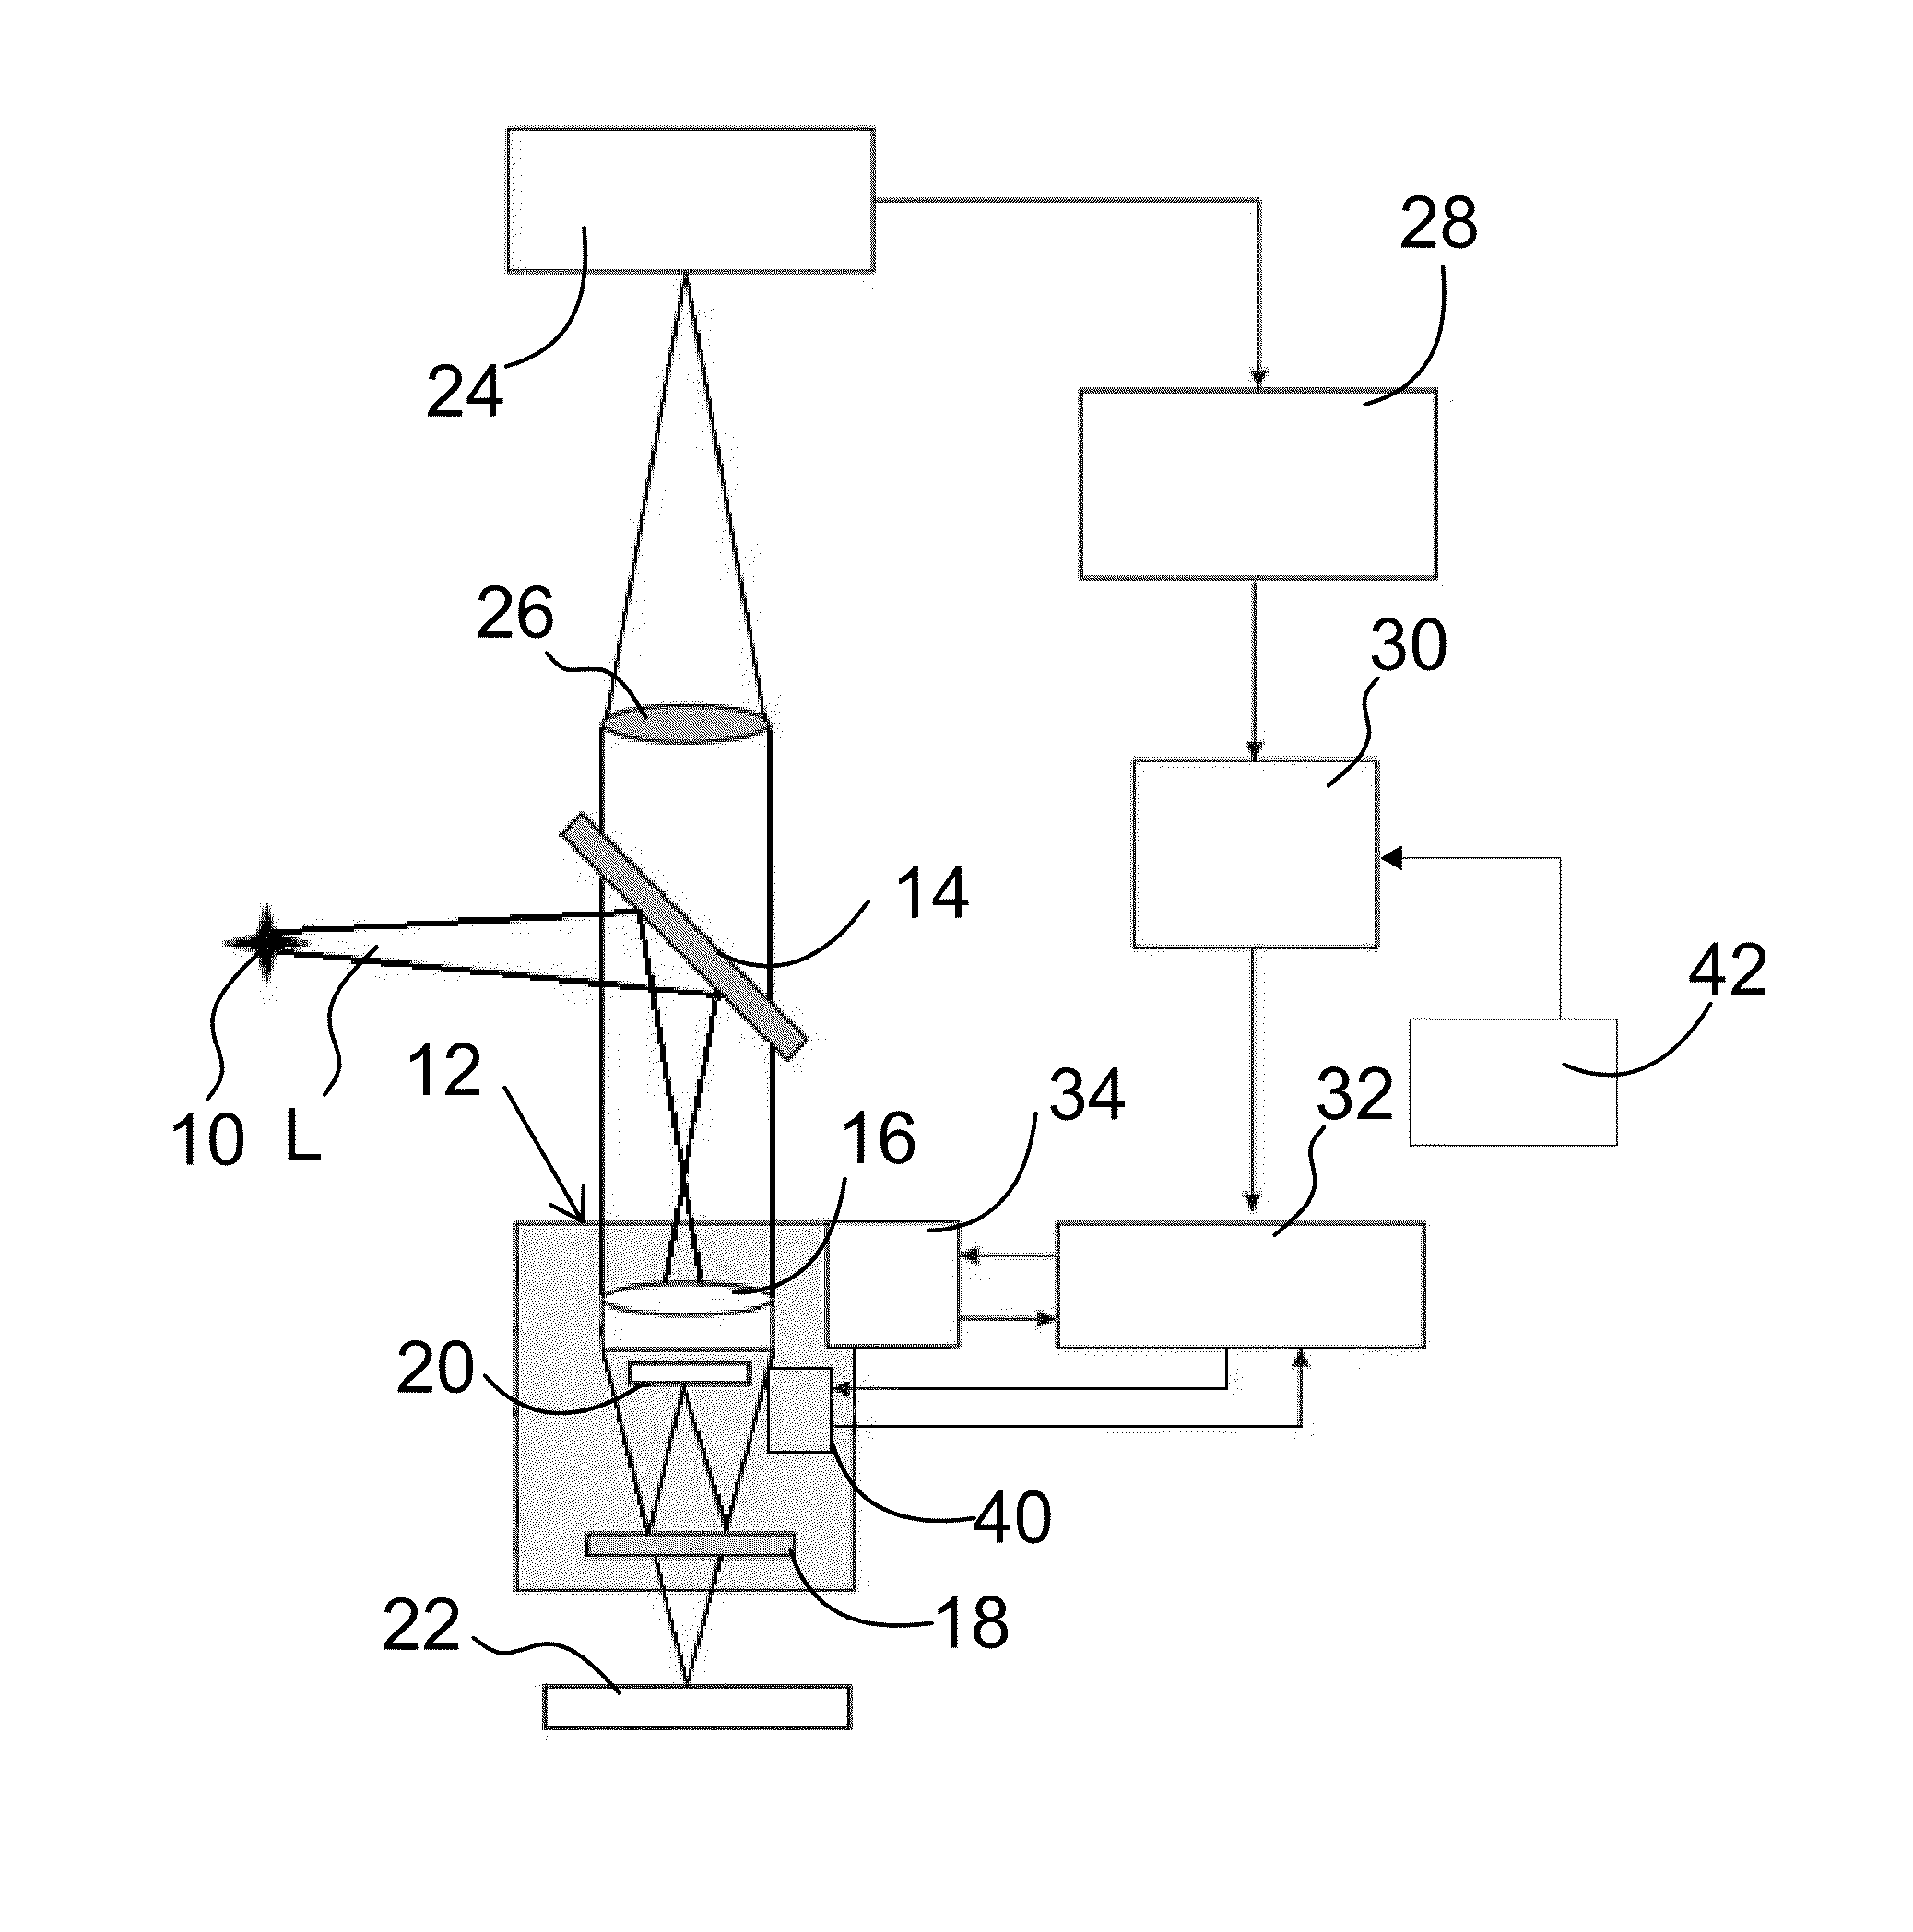 Automated re-focusing of interferometric reference mirror